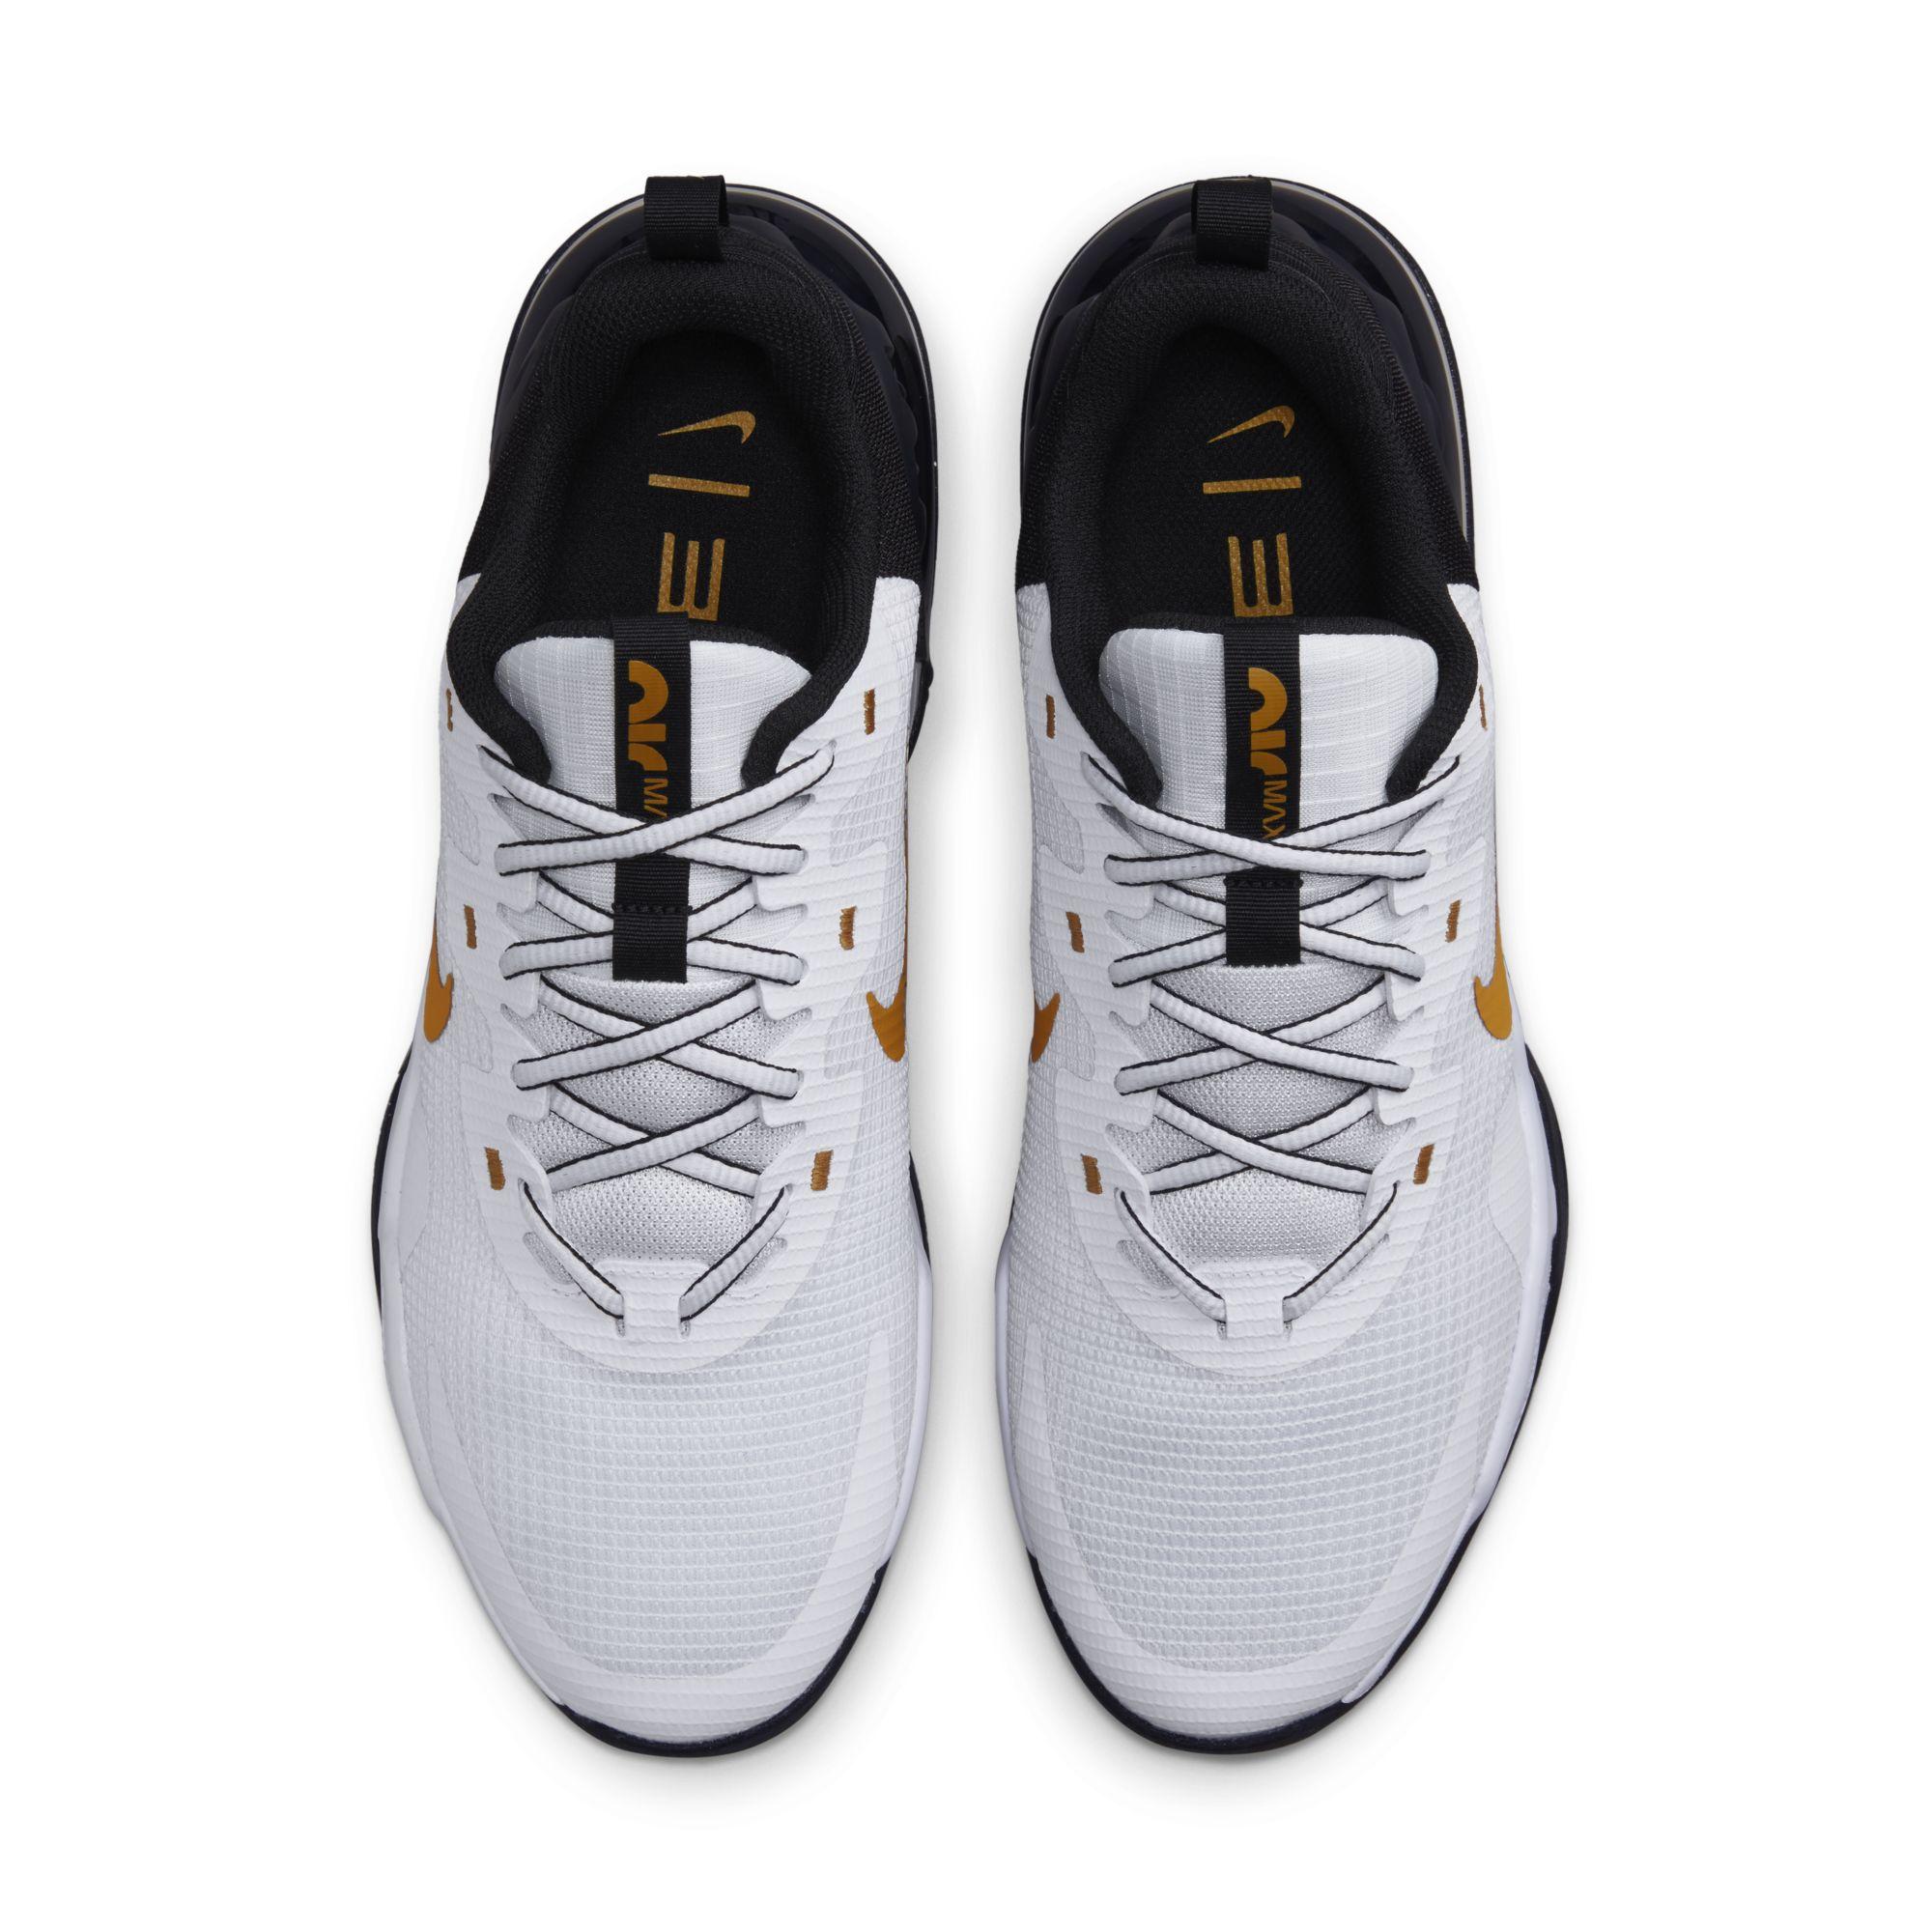 Nike Rubber Air Max Alpha Trainer 5 Training Shoes in White,Black,Gold  Suede (White) for Men | Lyst